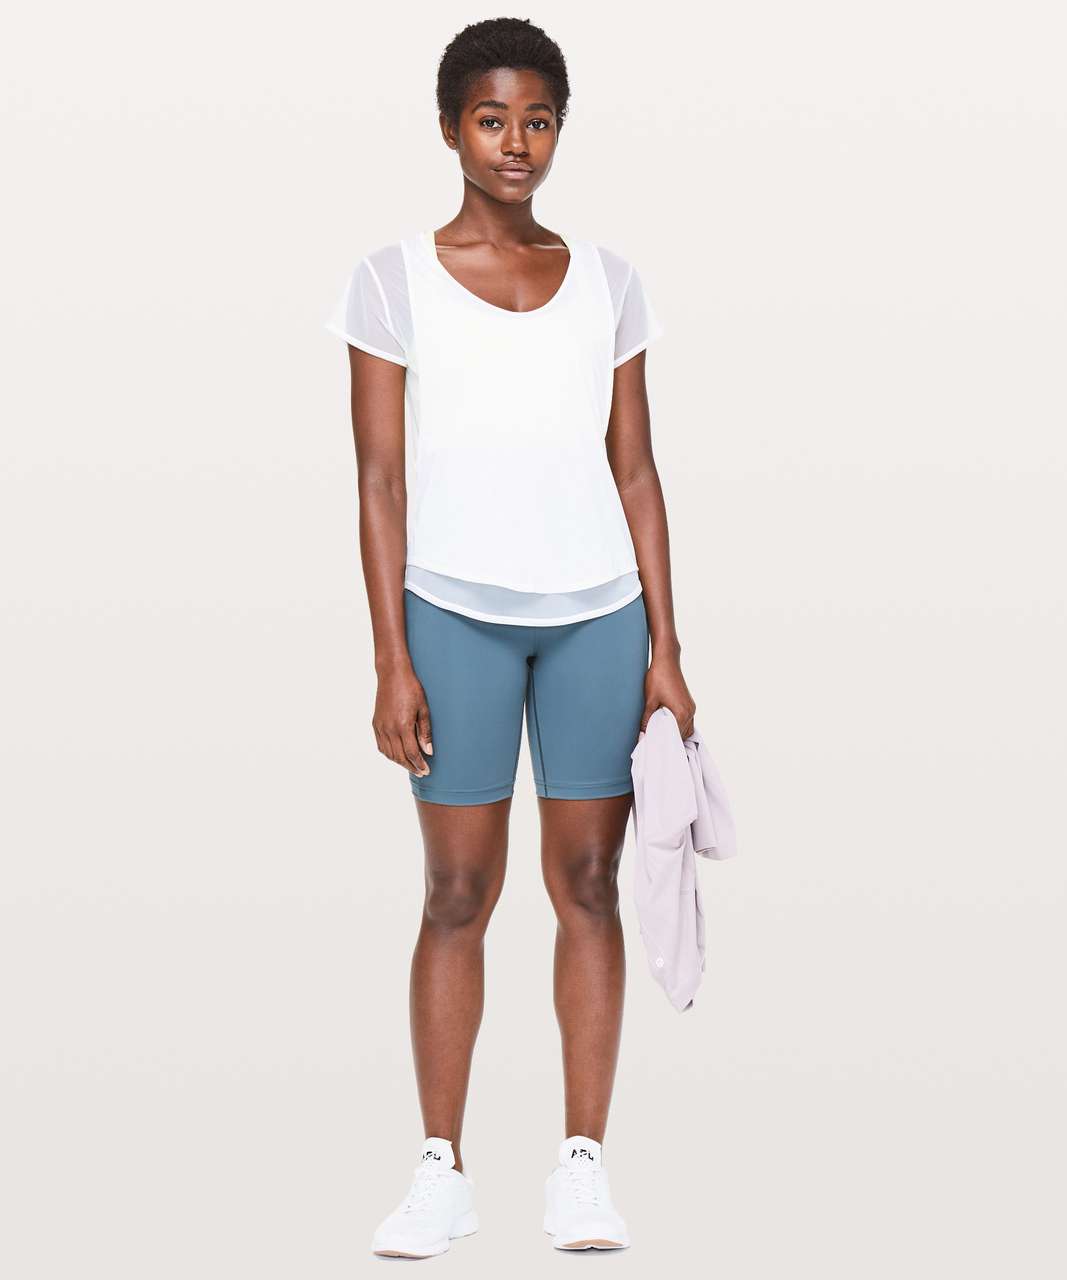 What to Wear with White Lululemon Shorts: Style Guide - Playbite